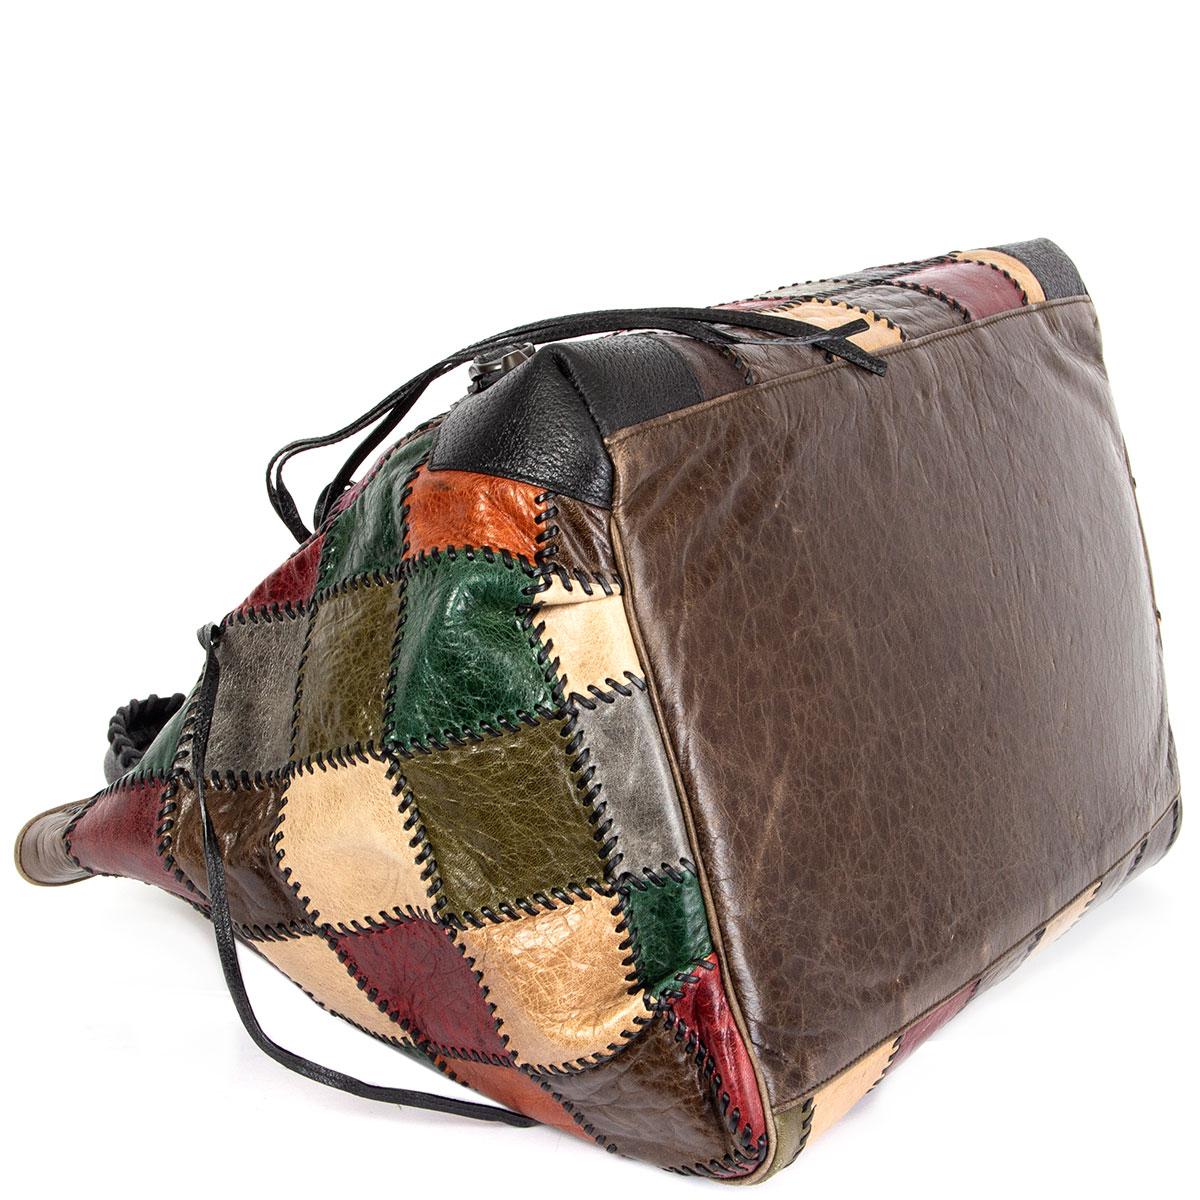 patchwork leather bag